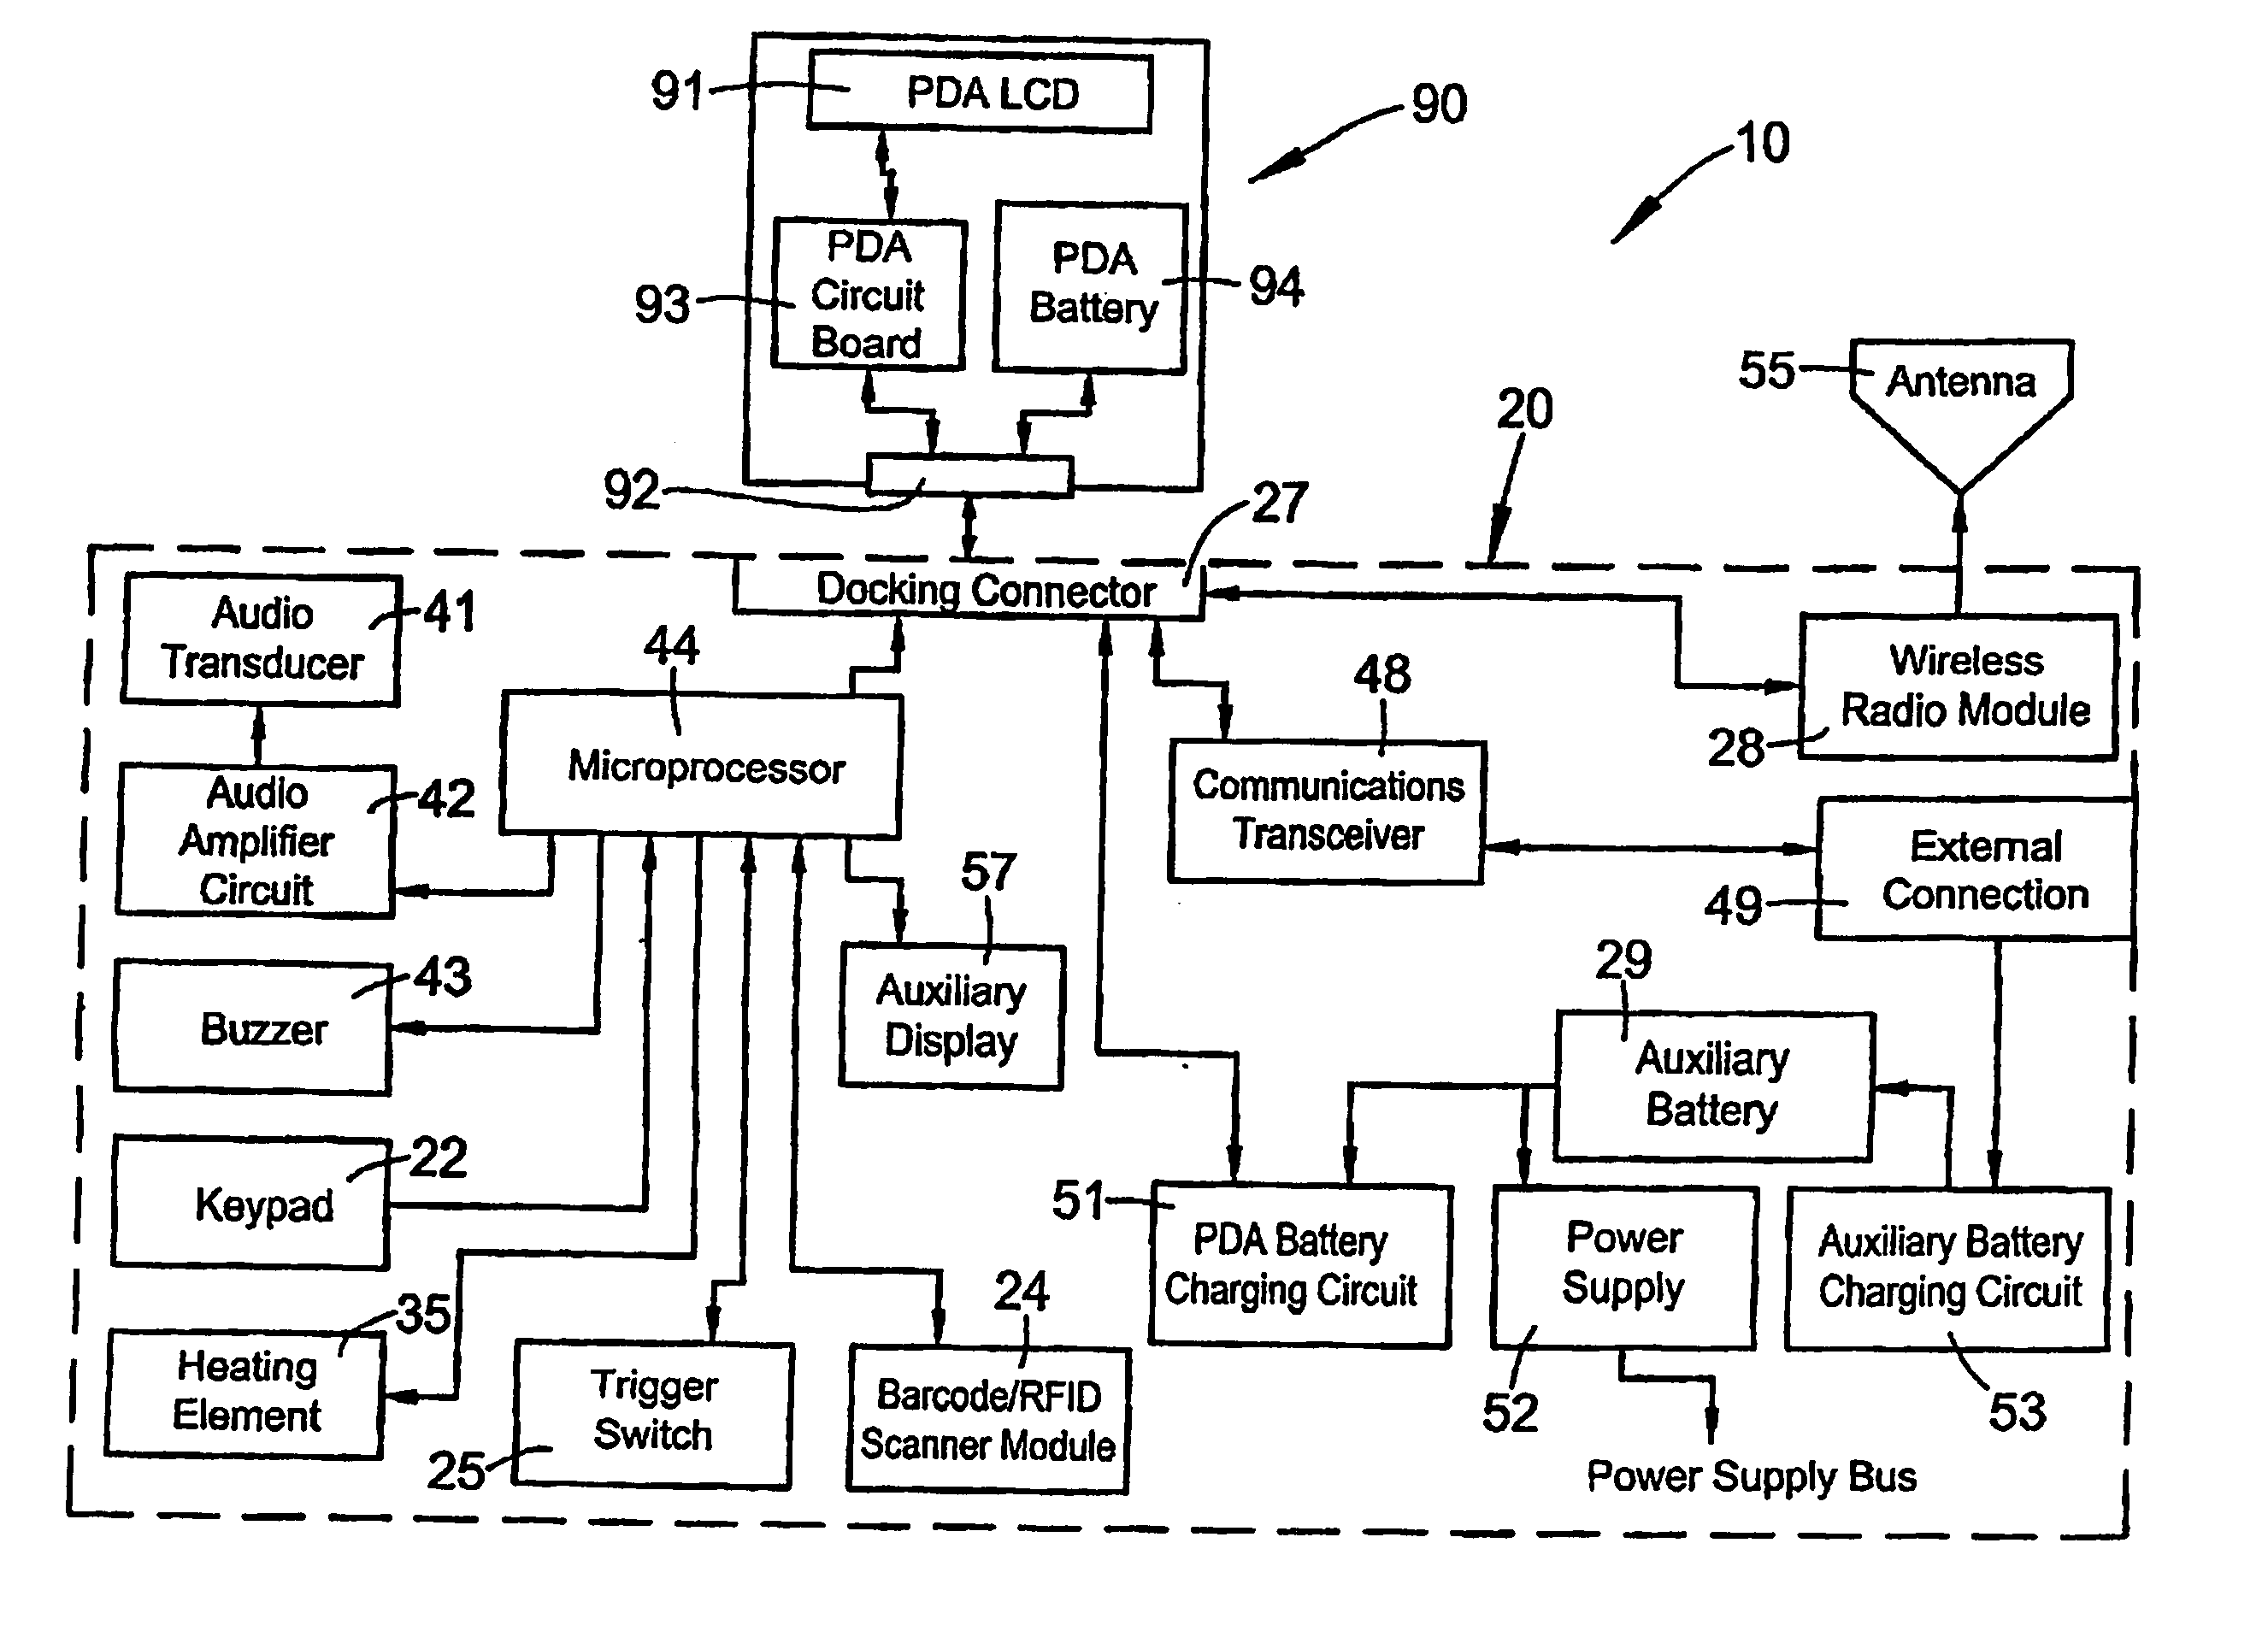 Portable data entry device with a detachable host pda